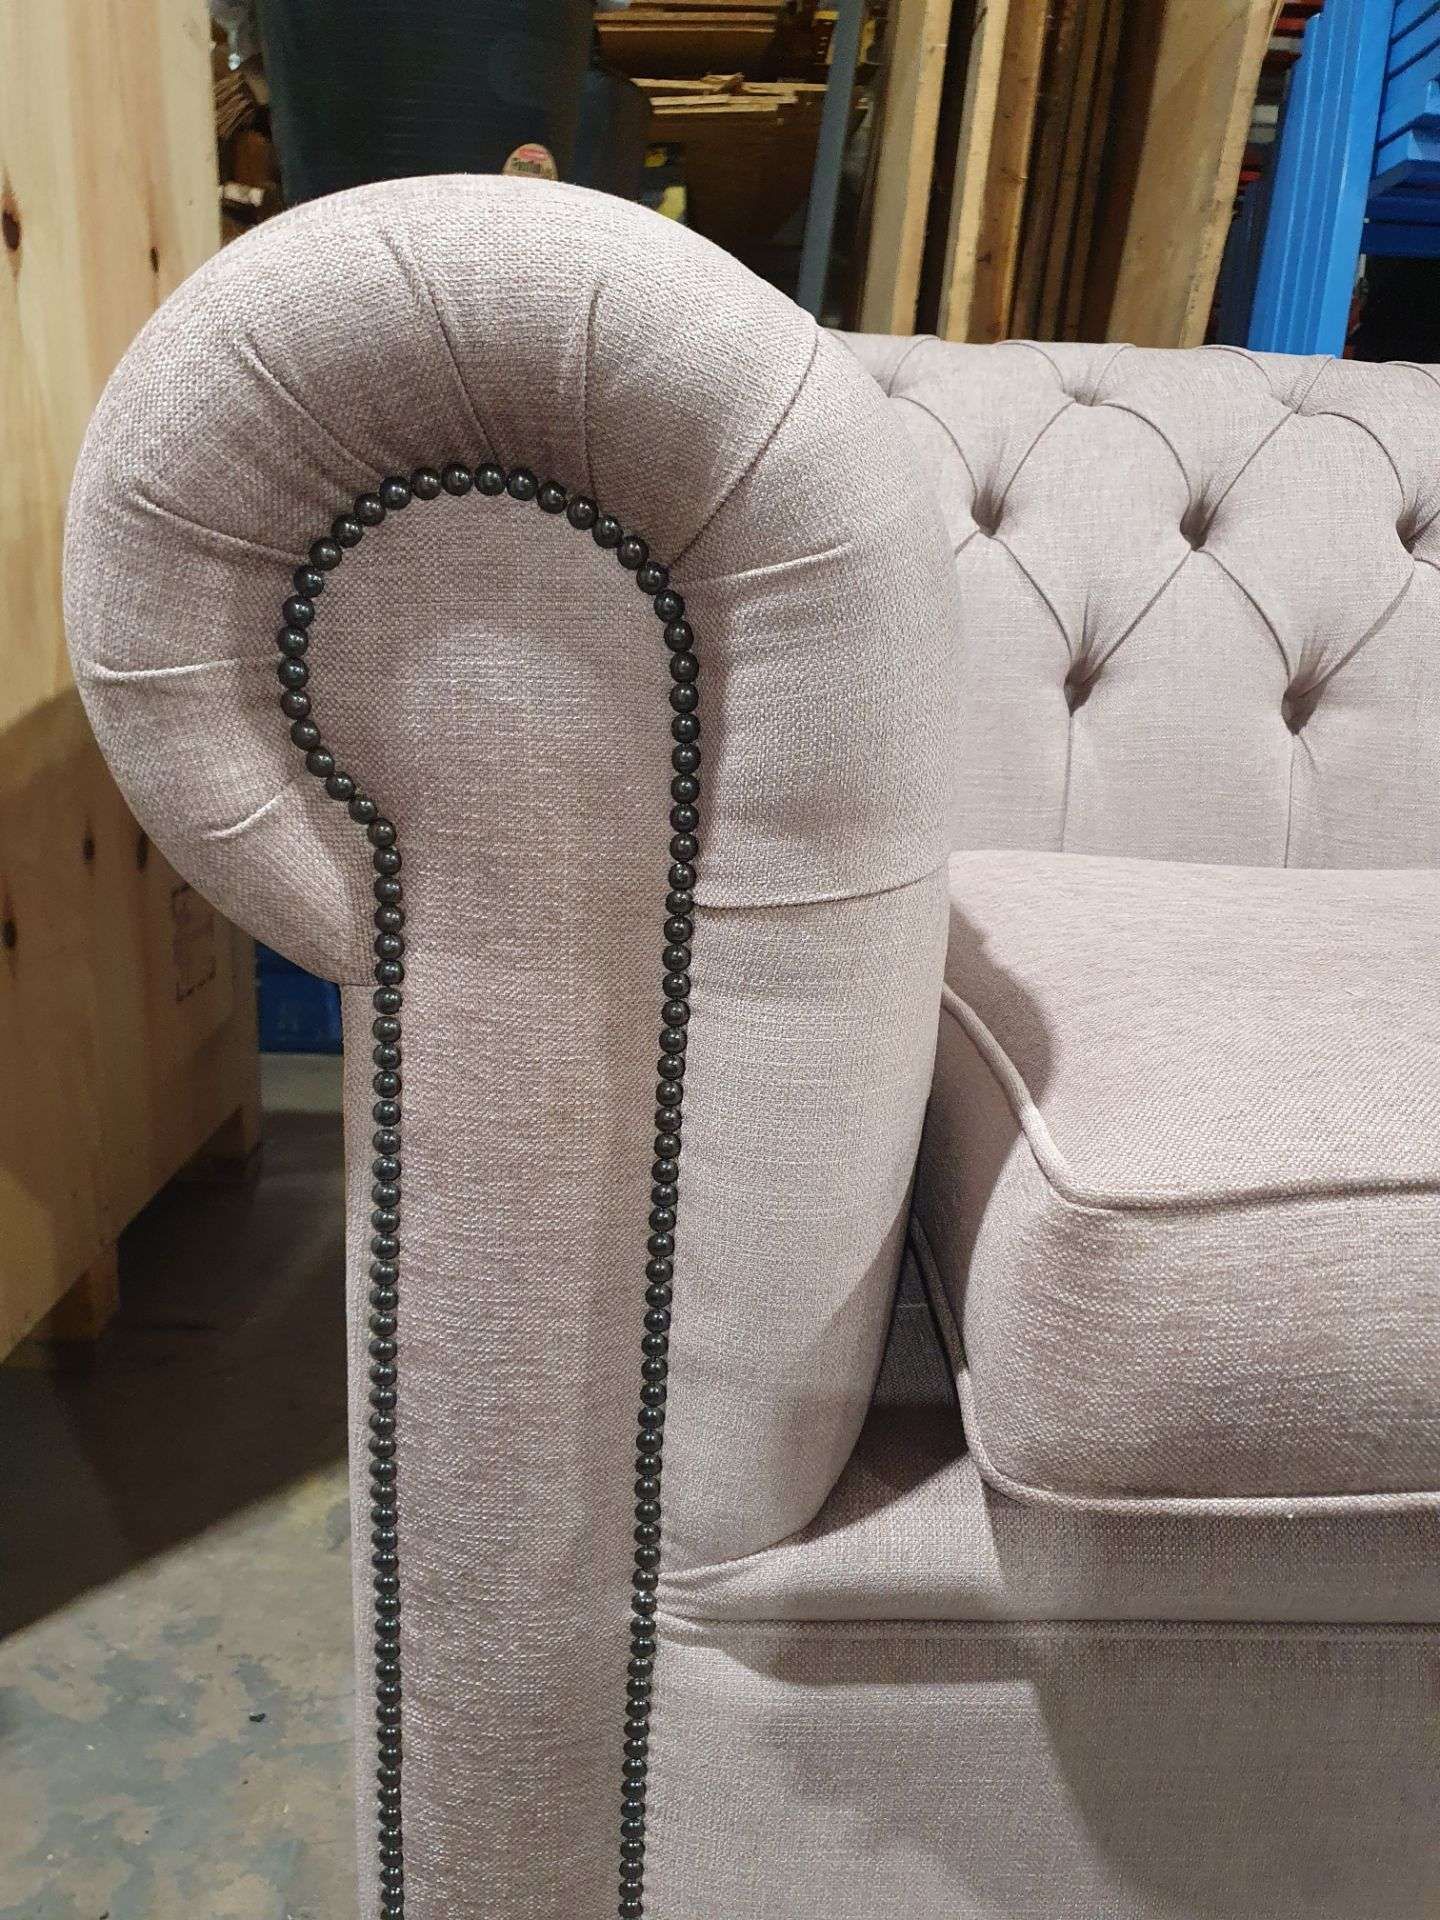 BESPOKE CHESTERFIELD 2 UNIT SOFA - Image 7 of 8